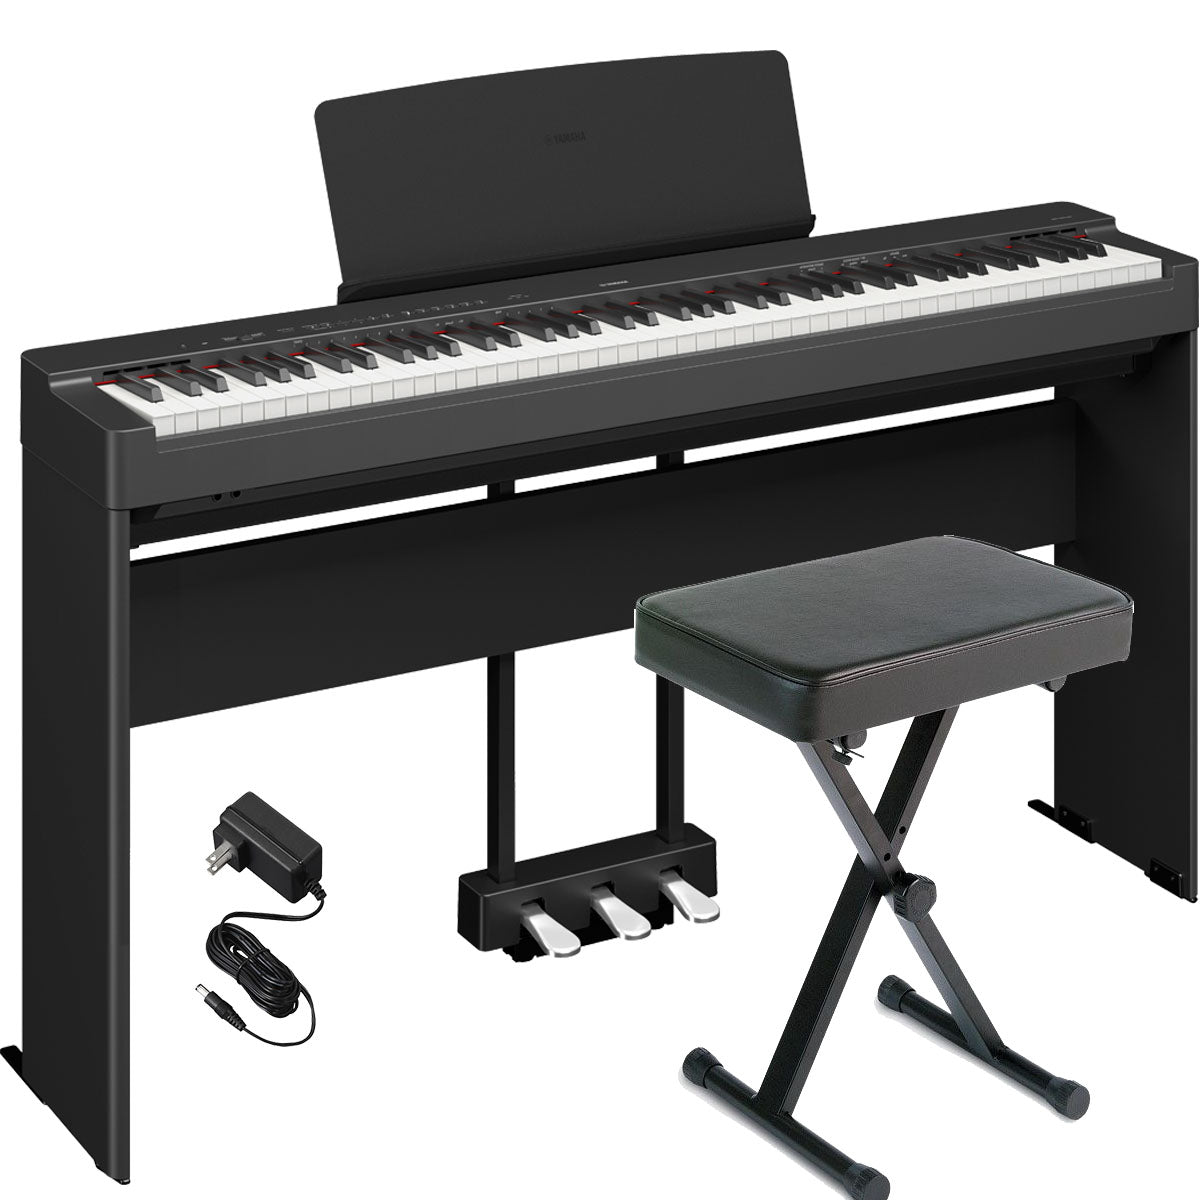  Yamaha P225B, 88-Key Weighted Action Digital Piano with Power  Supply and Sustain Pedal, Black (P225B) : Musical Instruments